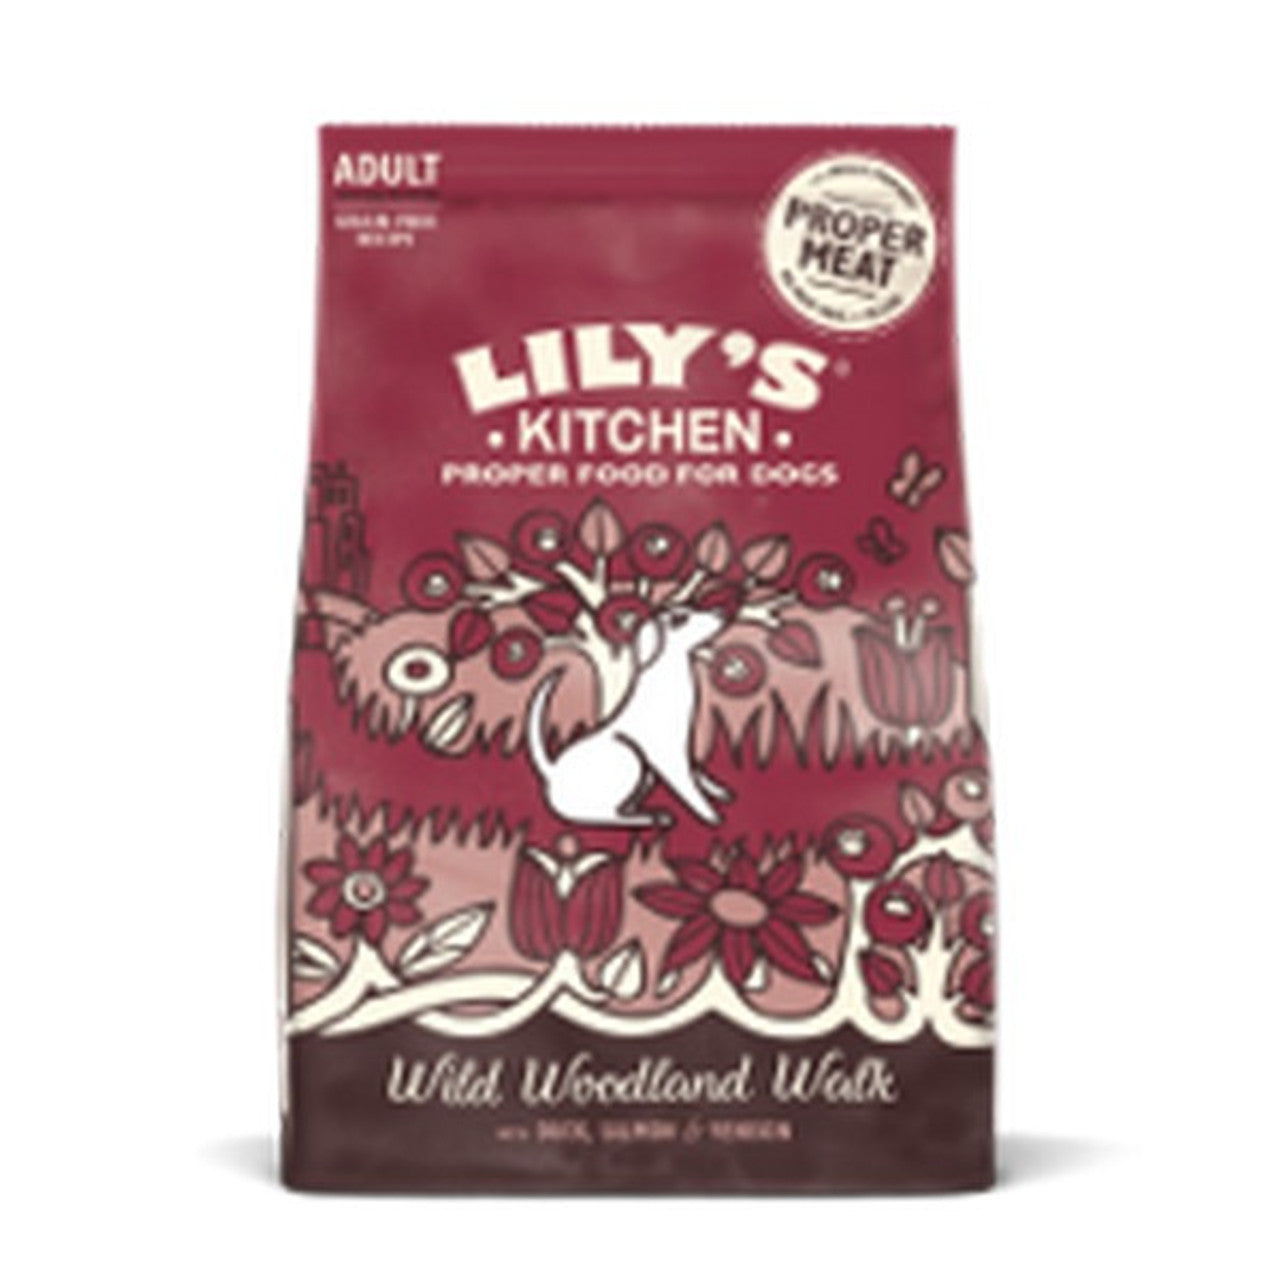 Lilys Kitchen Wild Woodland Walk with Duck Venison and Salmon Dry Dog Food 2.5kg